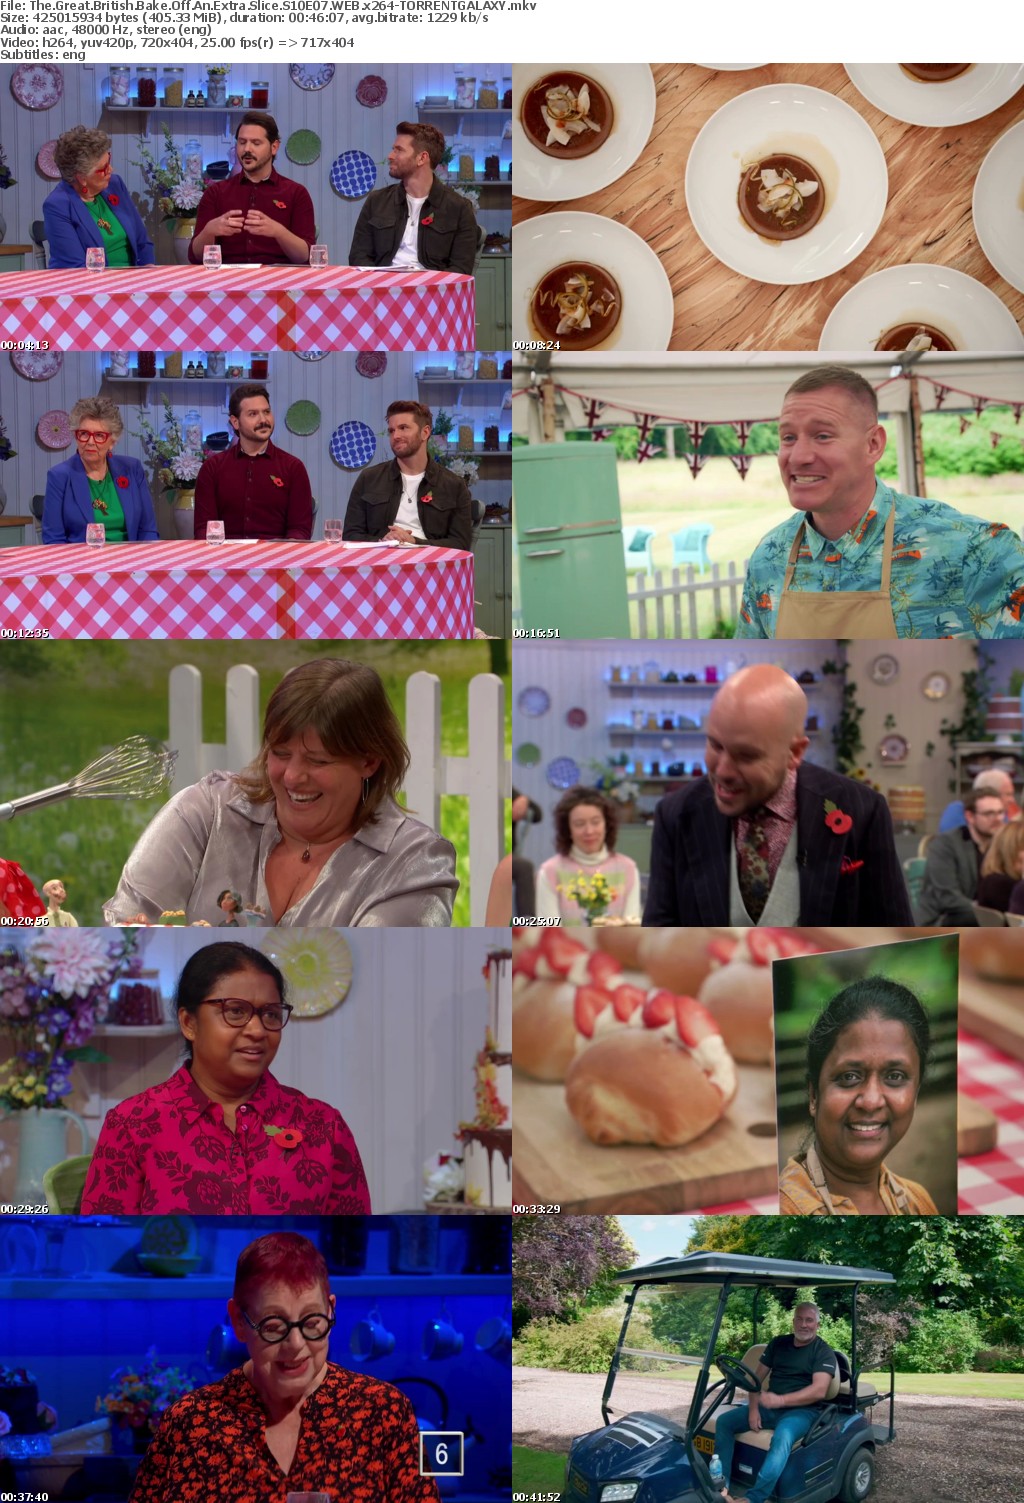 The Great British Bake Off An Extra Slice S10E07 WEB x264-GALAXY